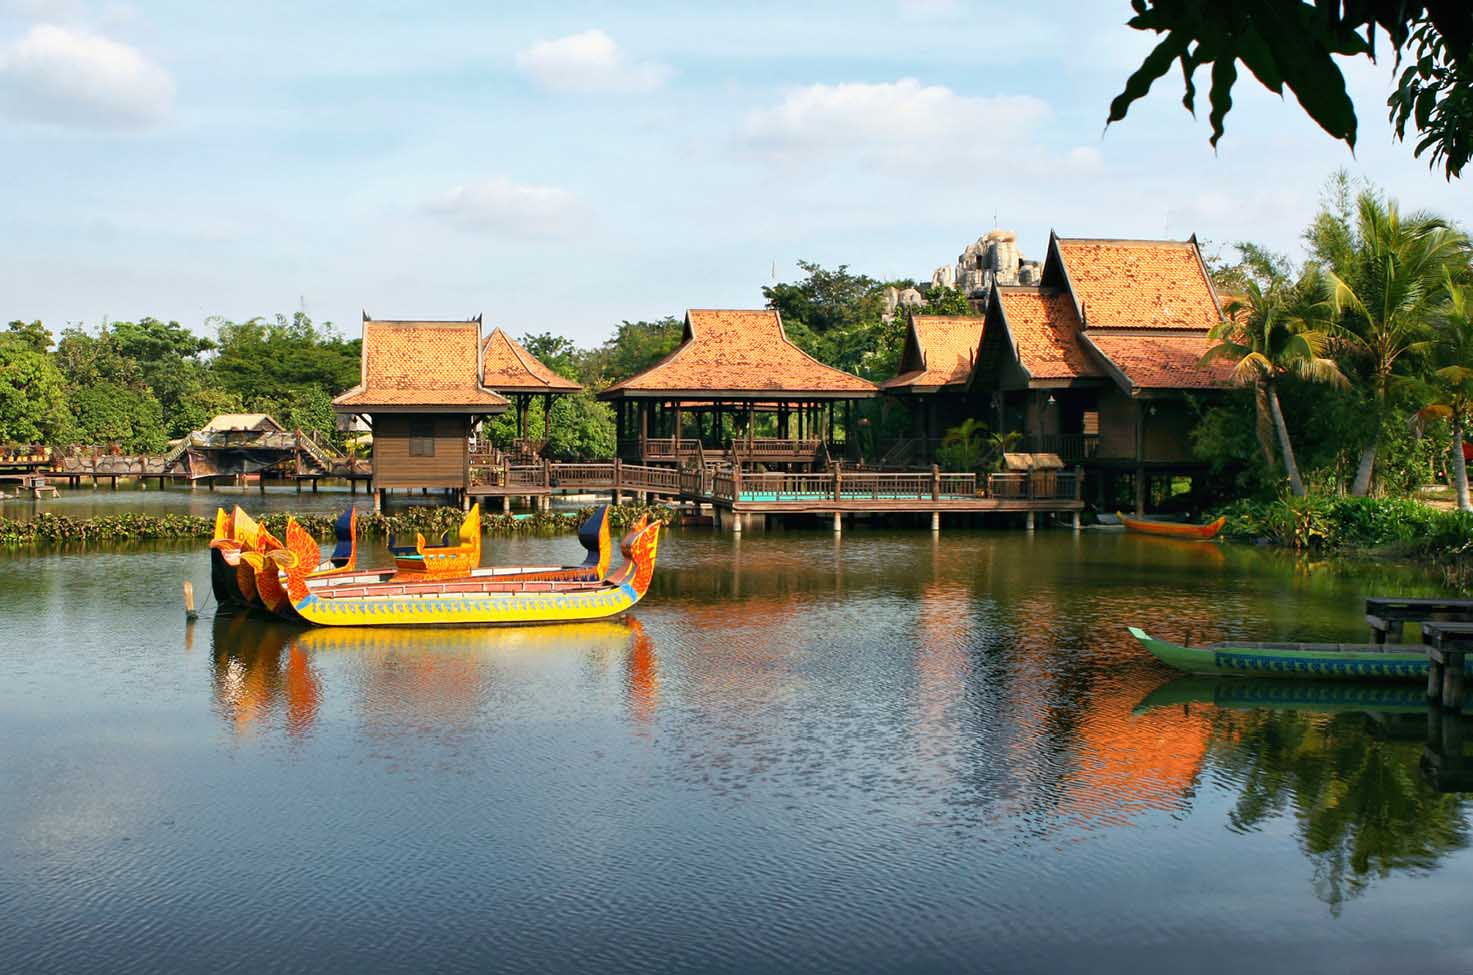 Tonle Sap in Siem Reap, Cambodia, with traditional huts and boats built on the river near the trees